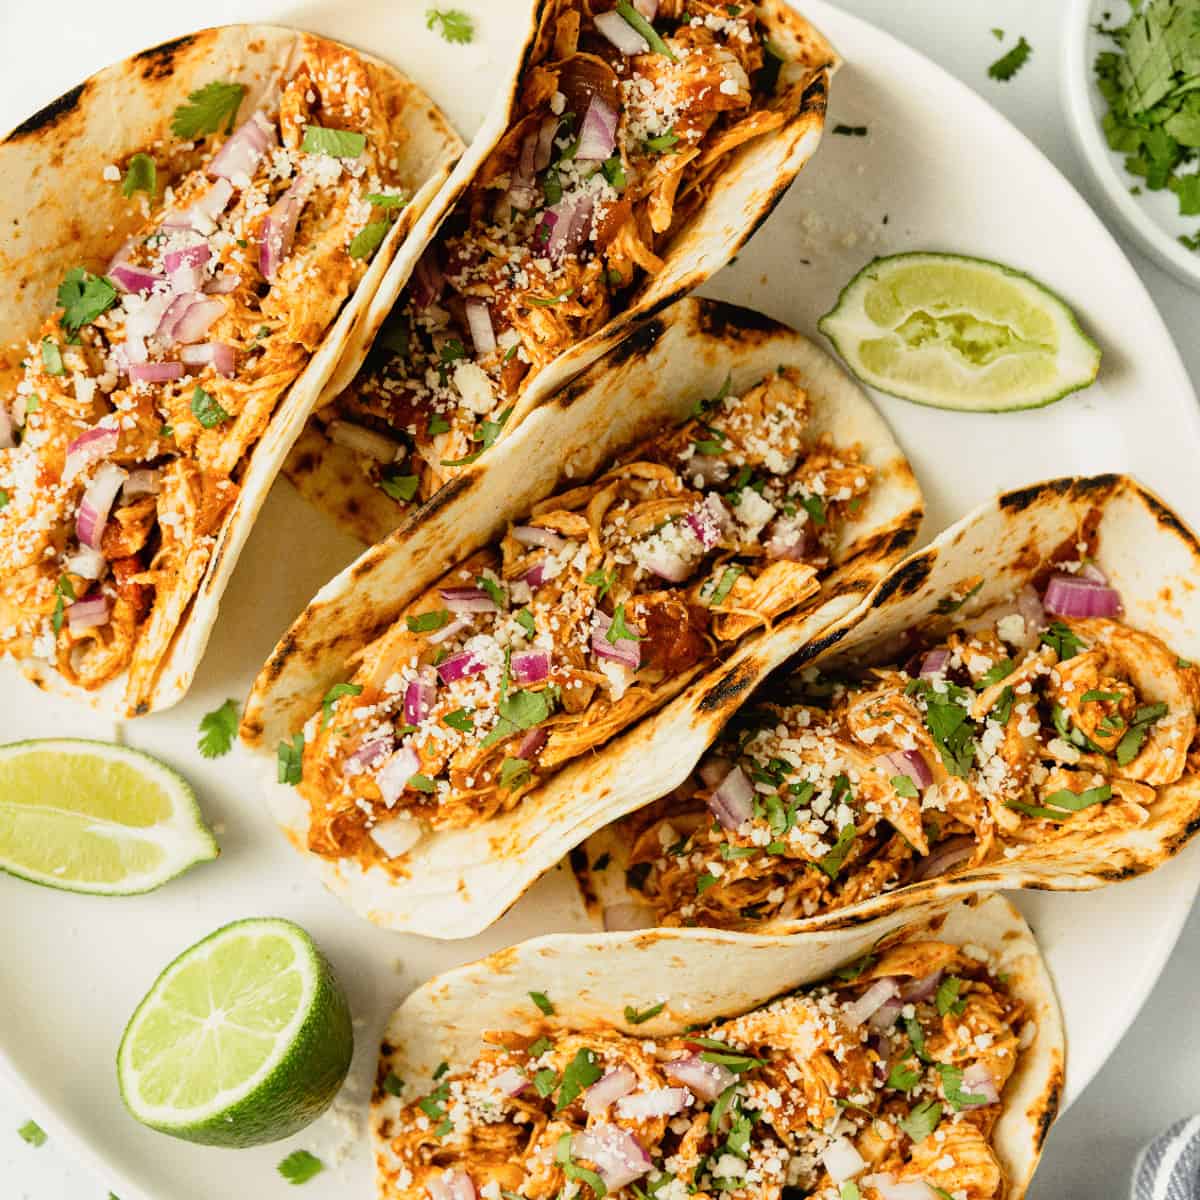 Tacos Archives - Midwest Foodie